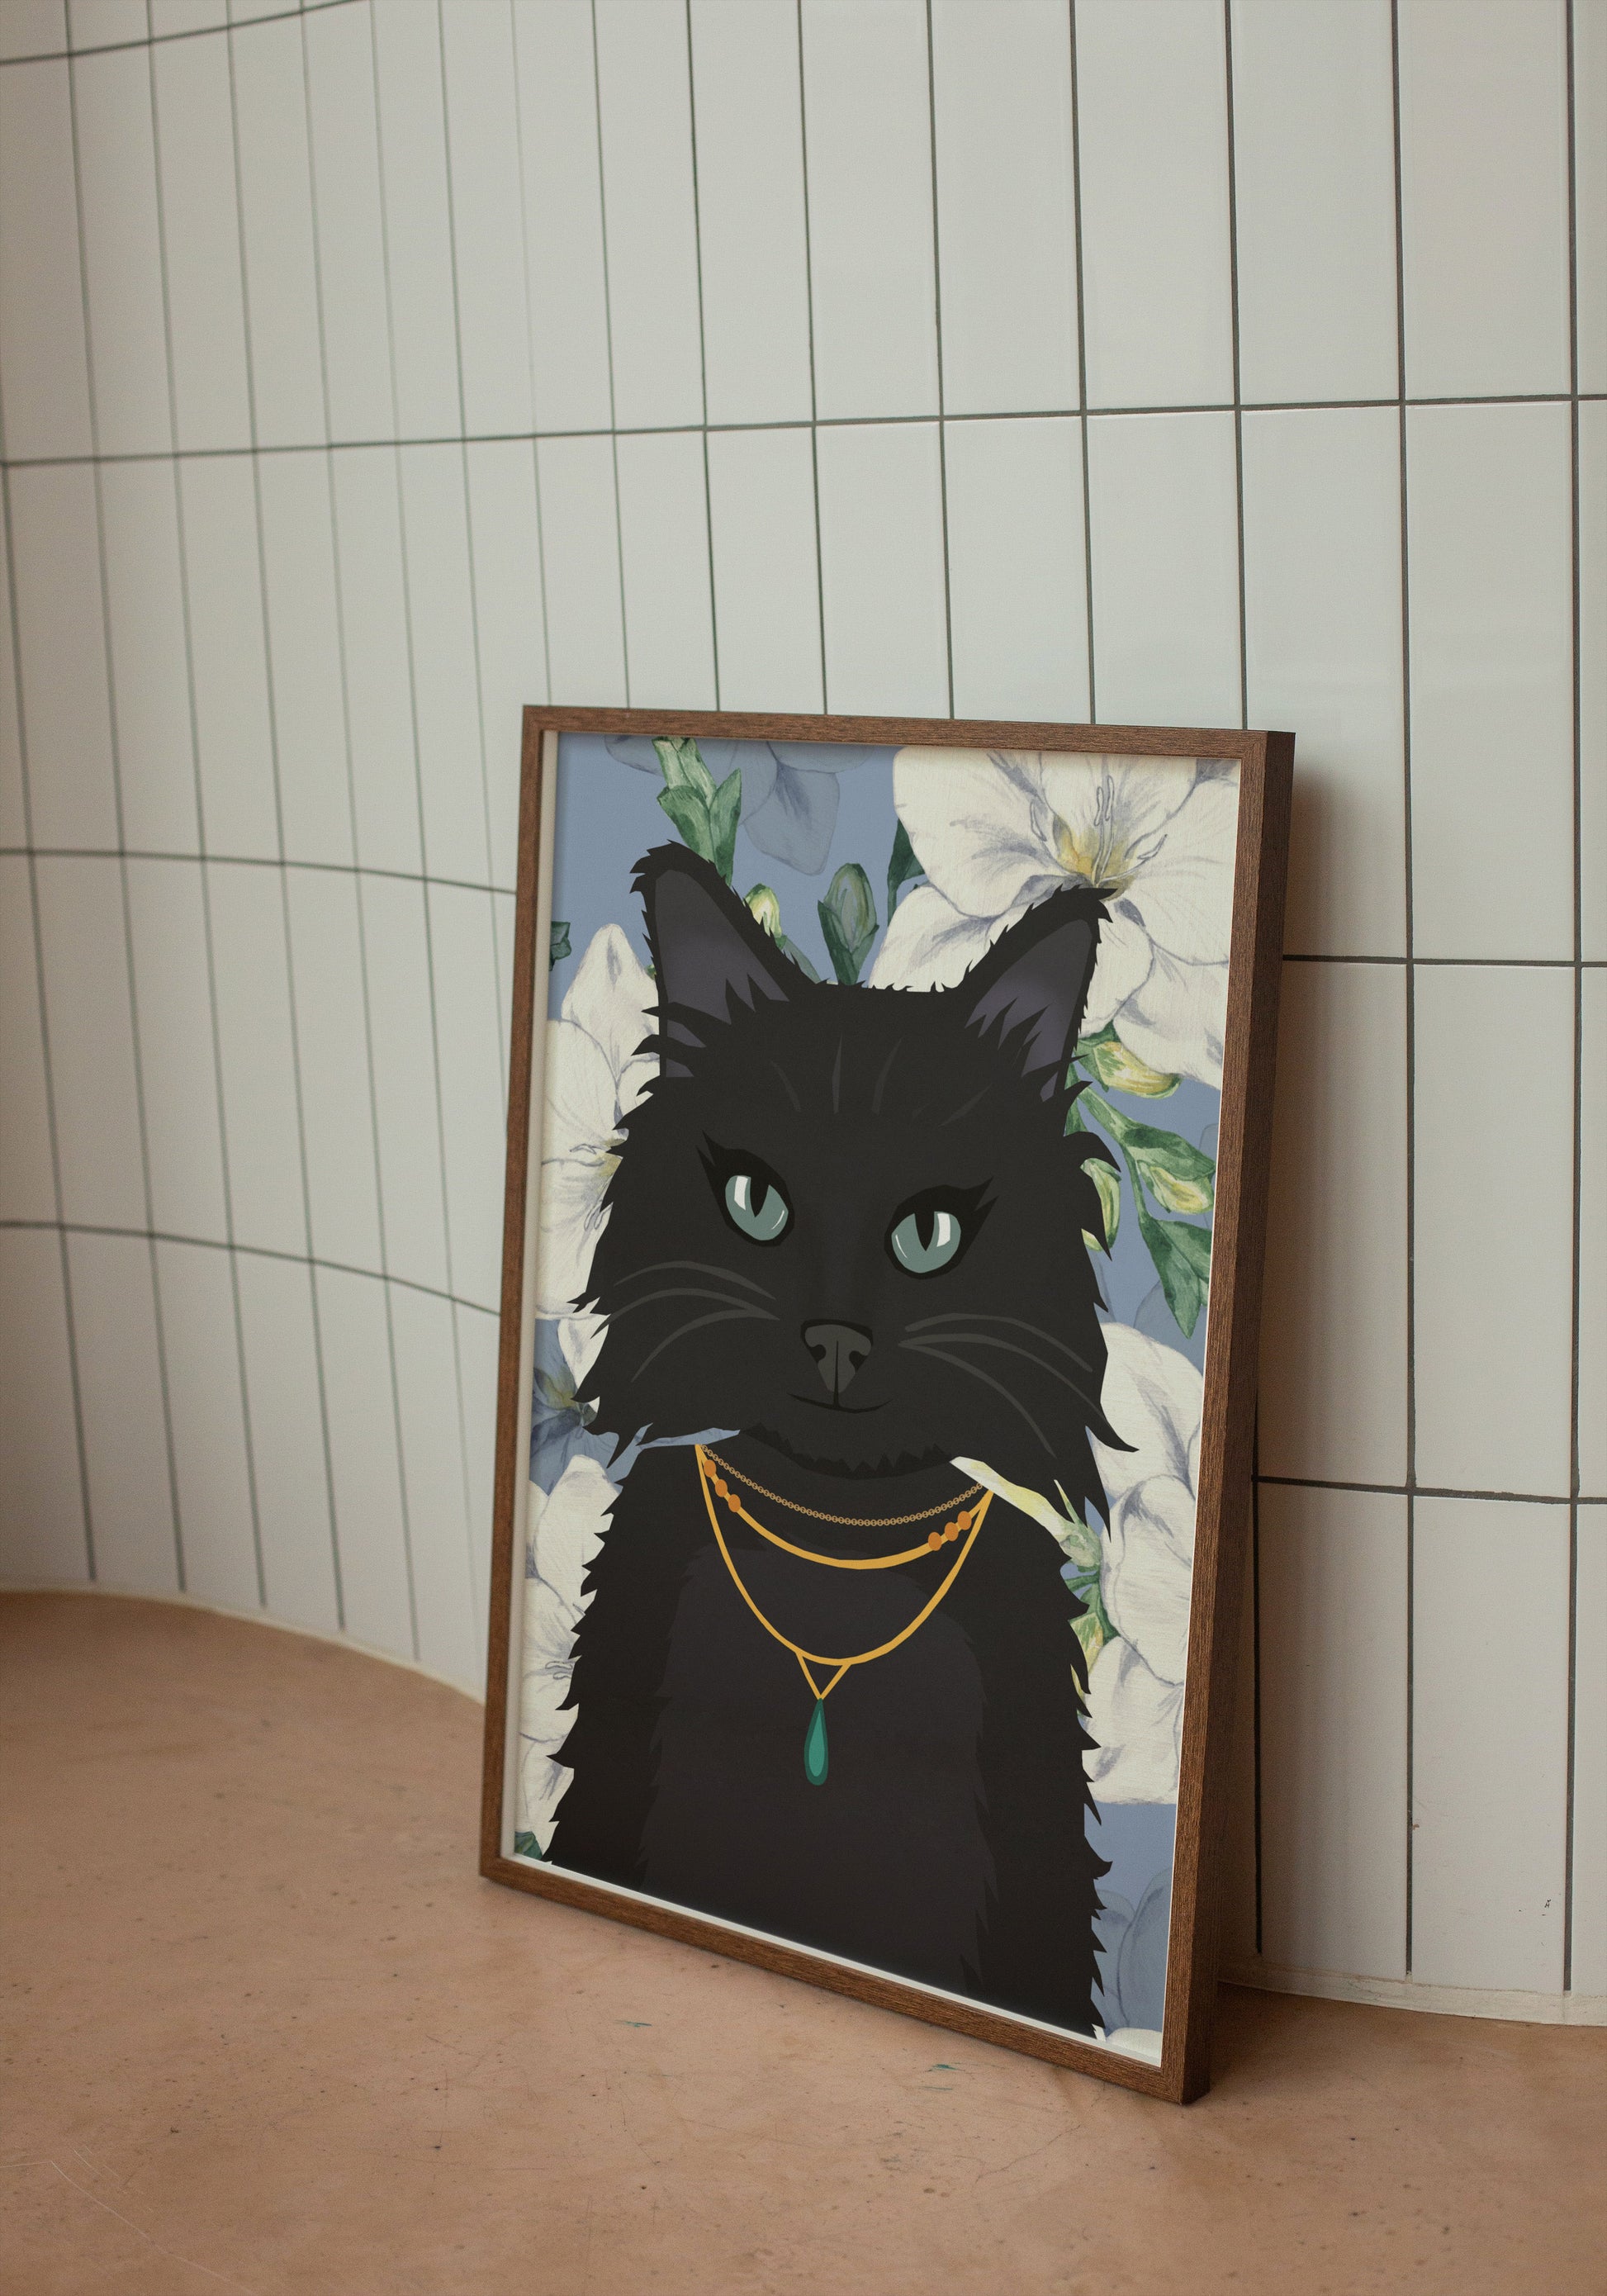 Black cat art print with floral blue and white background. Cat is wearing necklace.